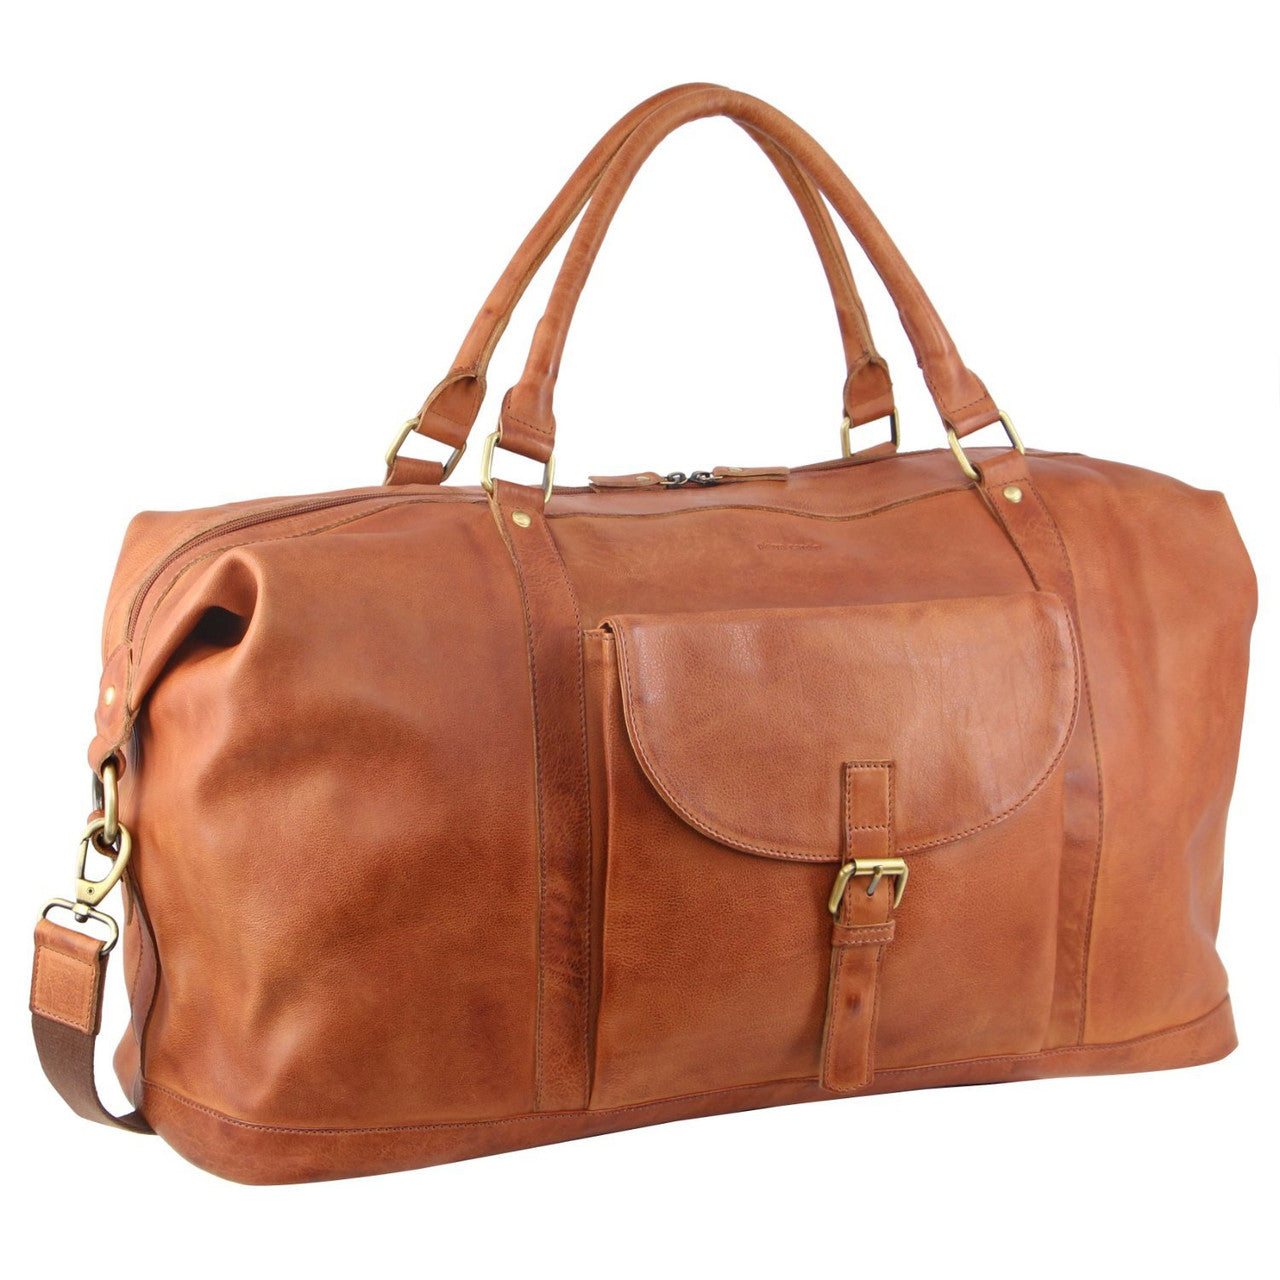 Pierre Cardin - Rustic Leather Overnight Bag with front flap pocket PC3134 - Cognac-1